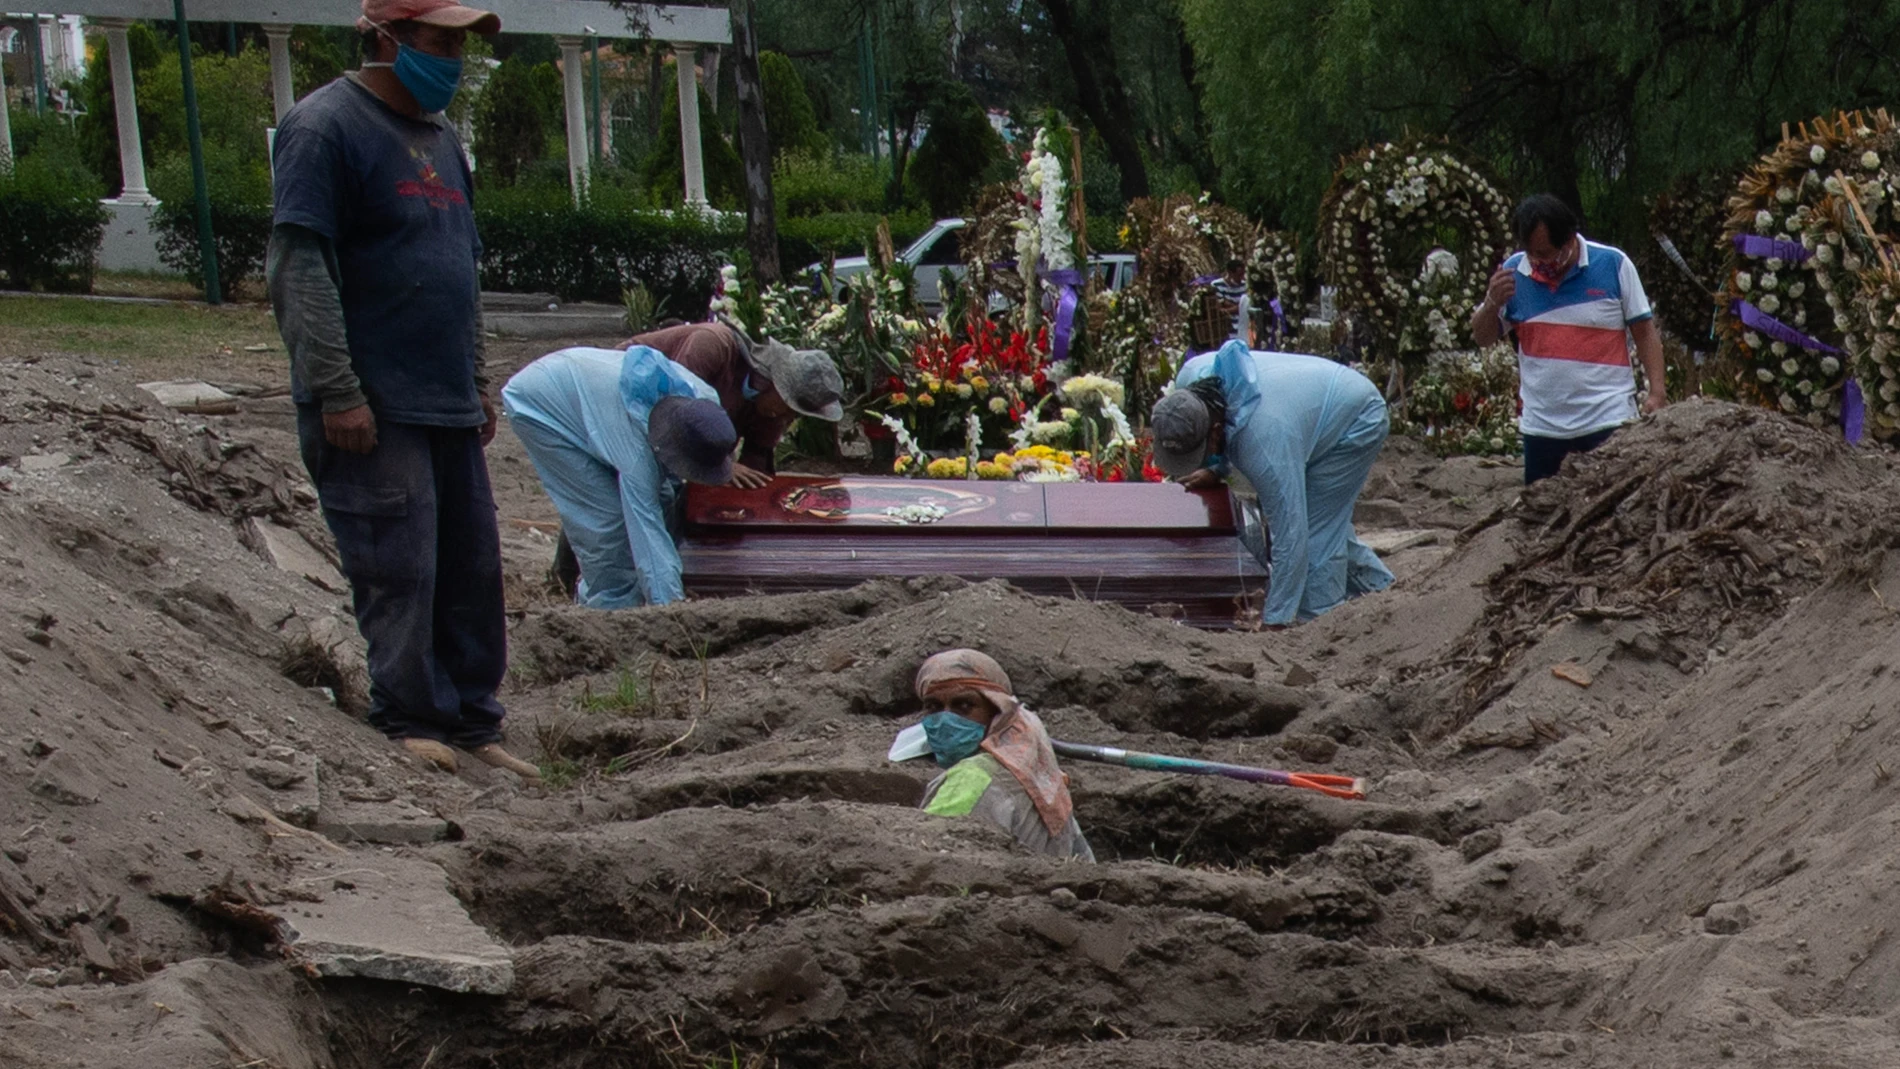 Burial service for Coronavirus victims in Mexico